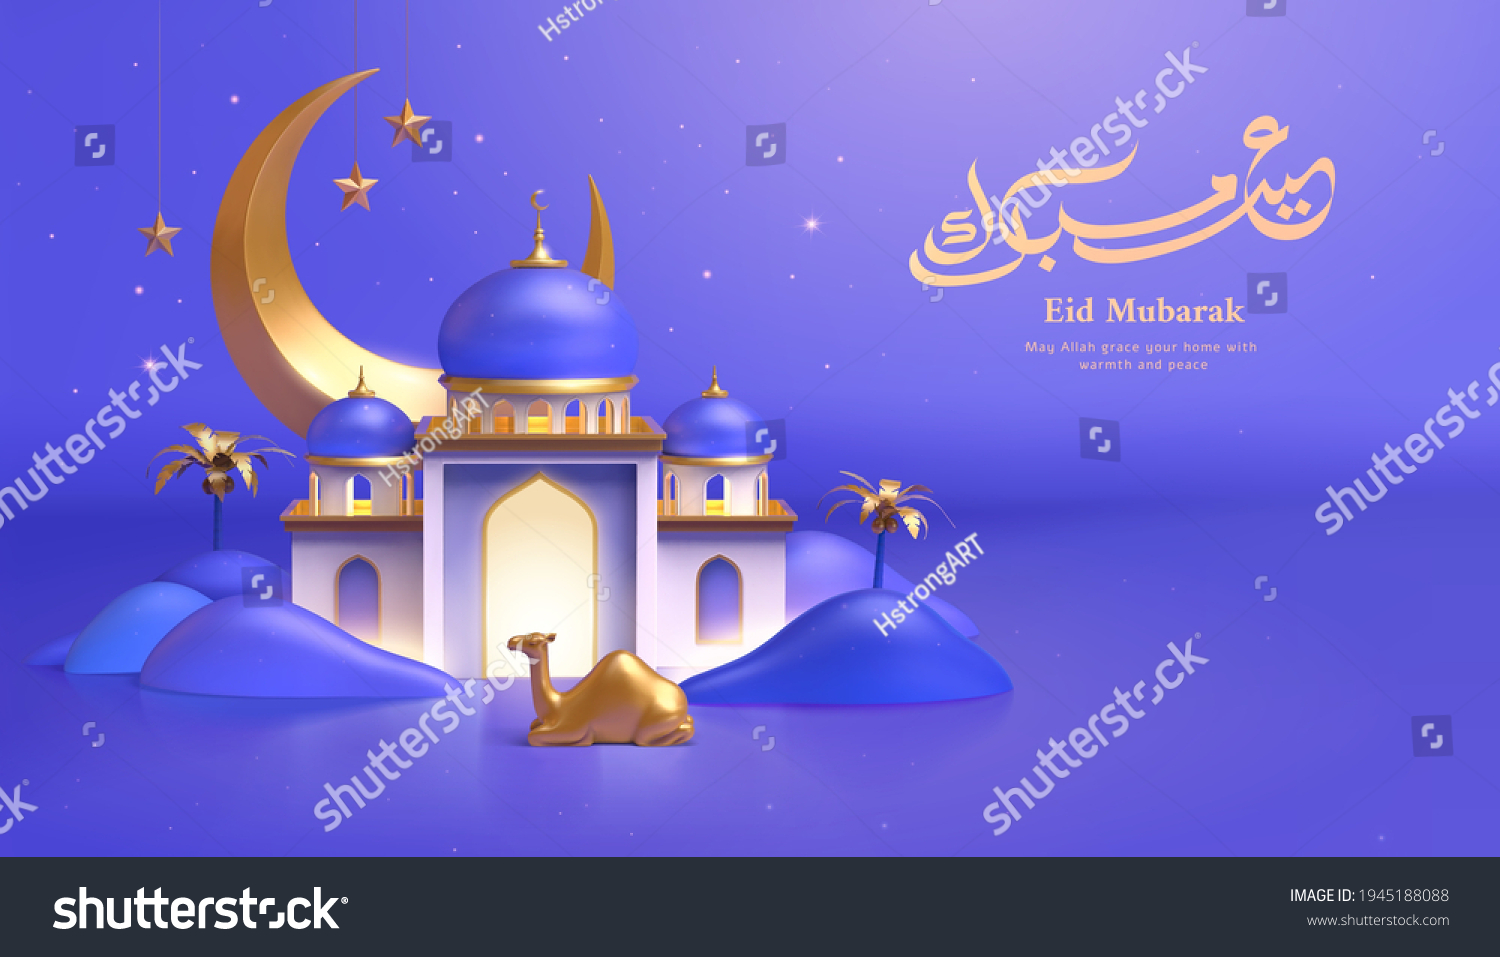 stock-vector–d-modern-islamic-holiday-banner-designed-with-camel-toy-sitting-in-front-of-a-lit-up-mosque-model-1945188088